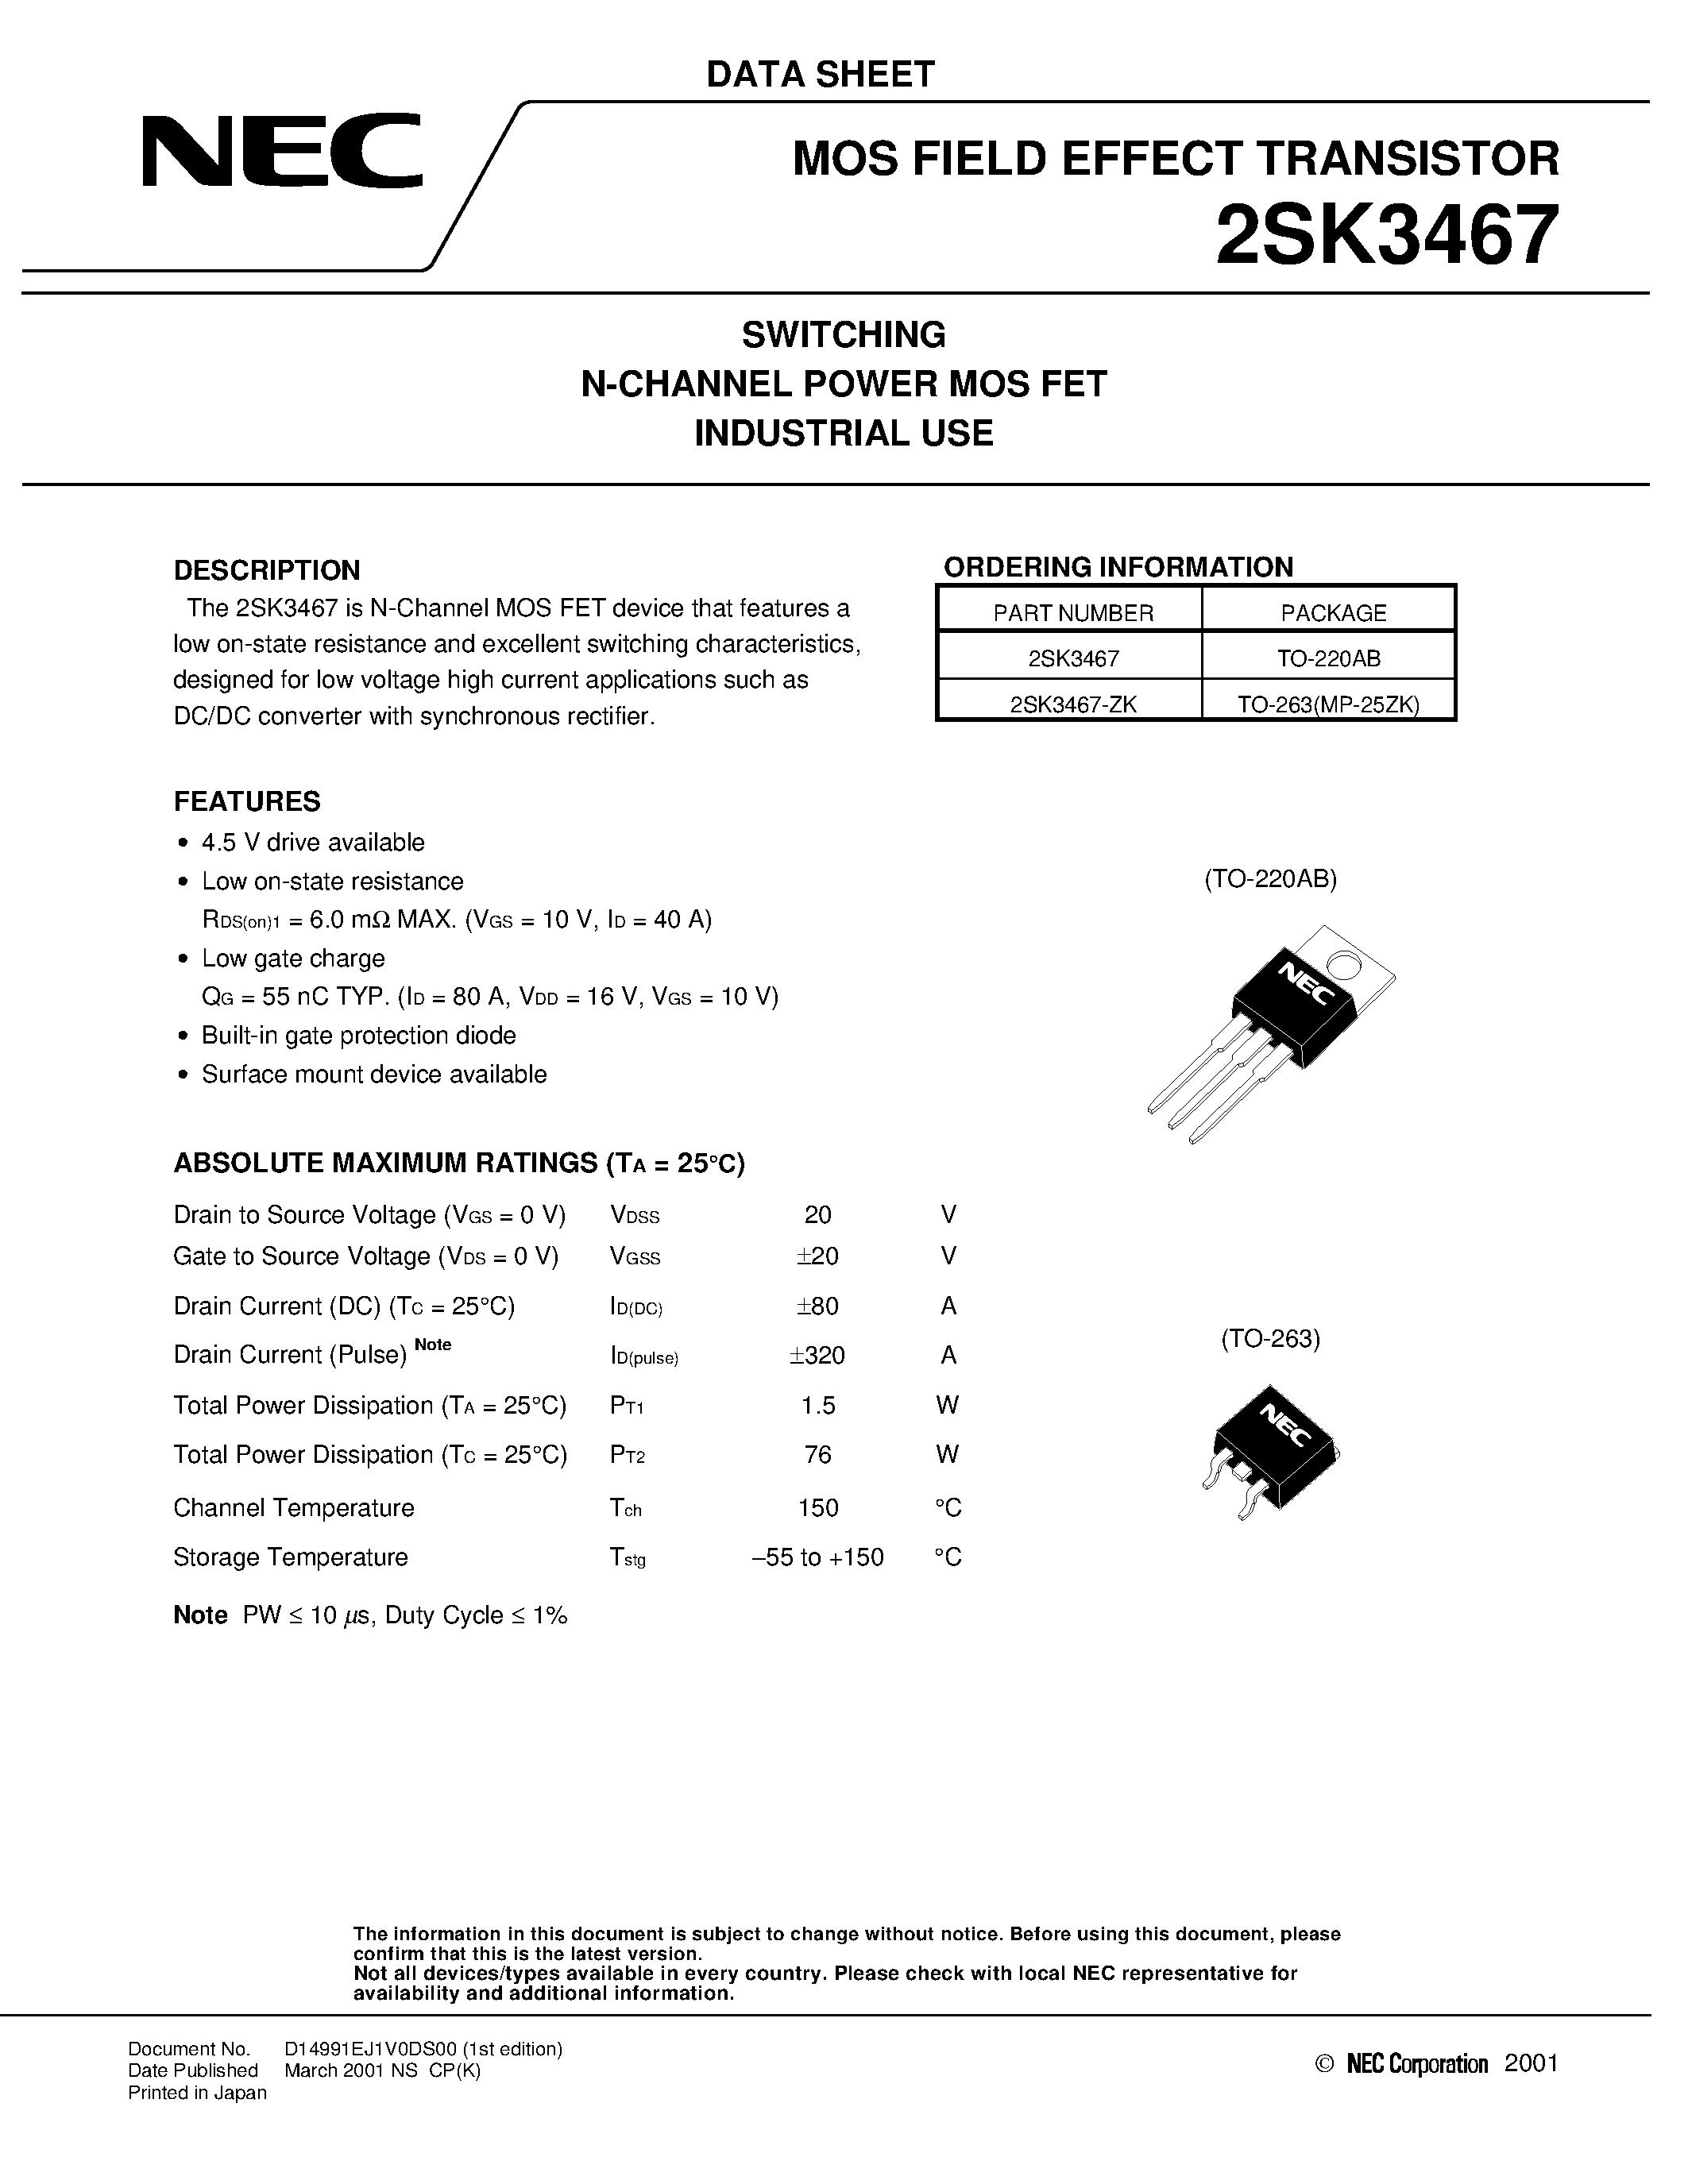 Datasheet 2SK3467 - SWITCHING N-CHANNEL POWER MOSFET INDUSTRIAL USE page 1